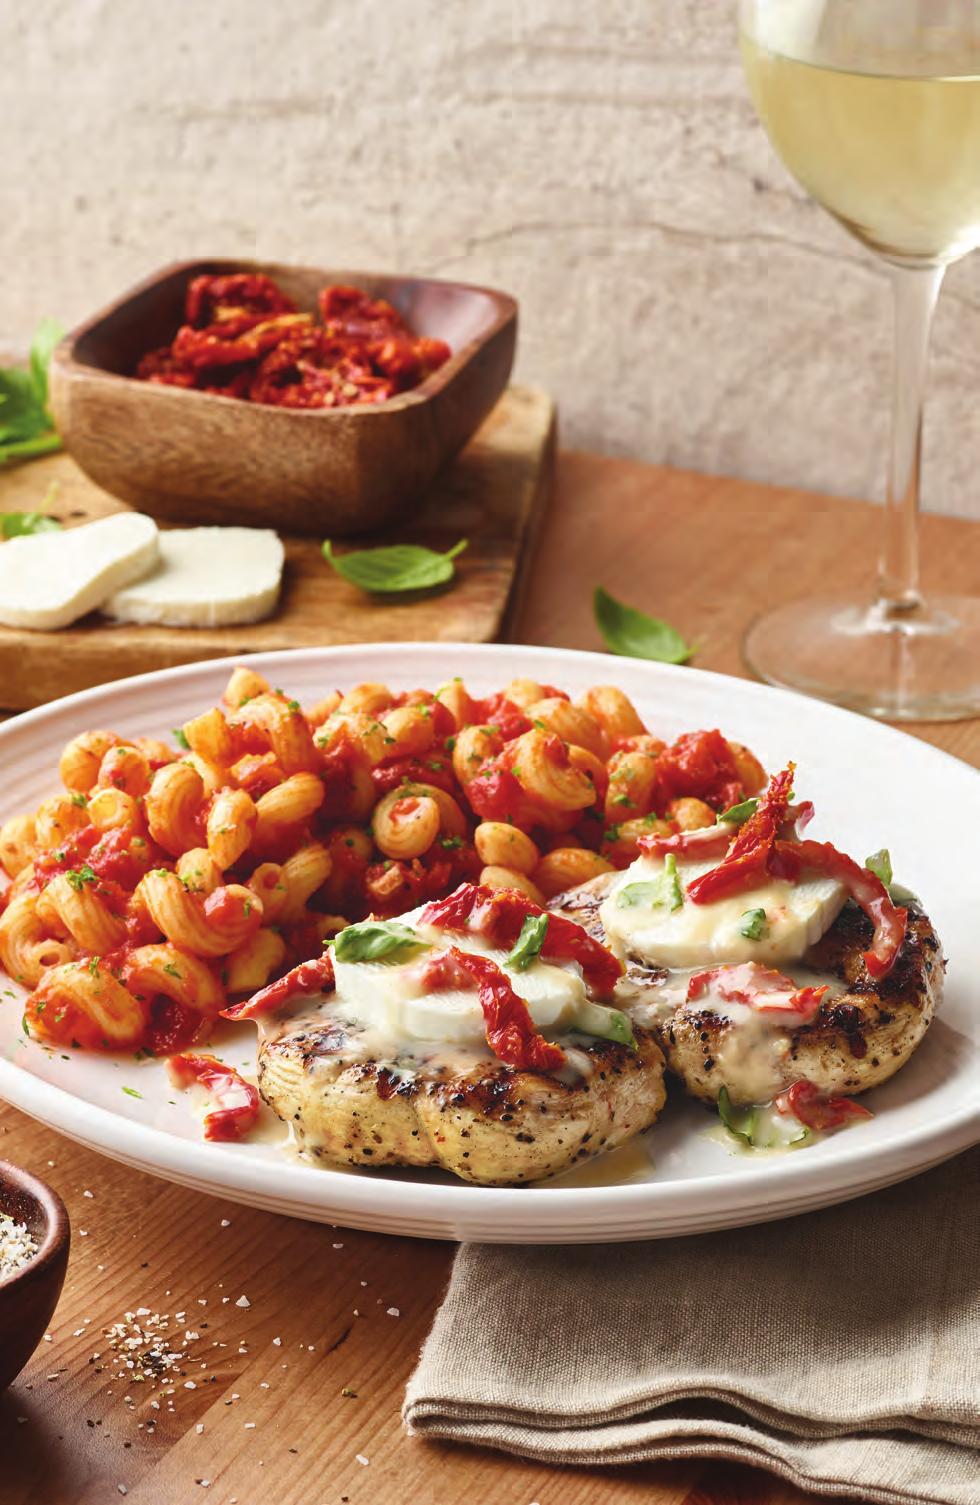 Visit CARRABBAS.COM/EXPRESS to place an order online. WE CATER! Call for more details.